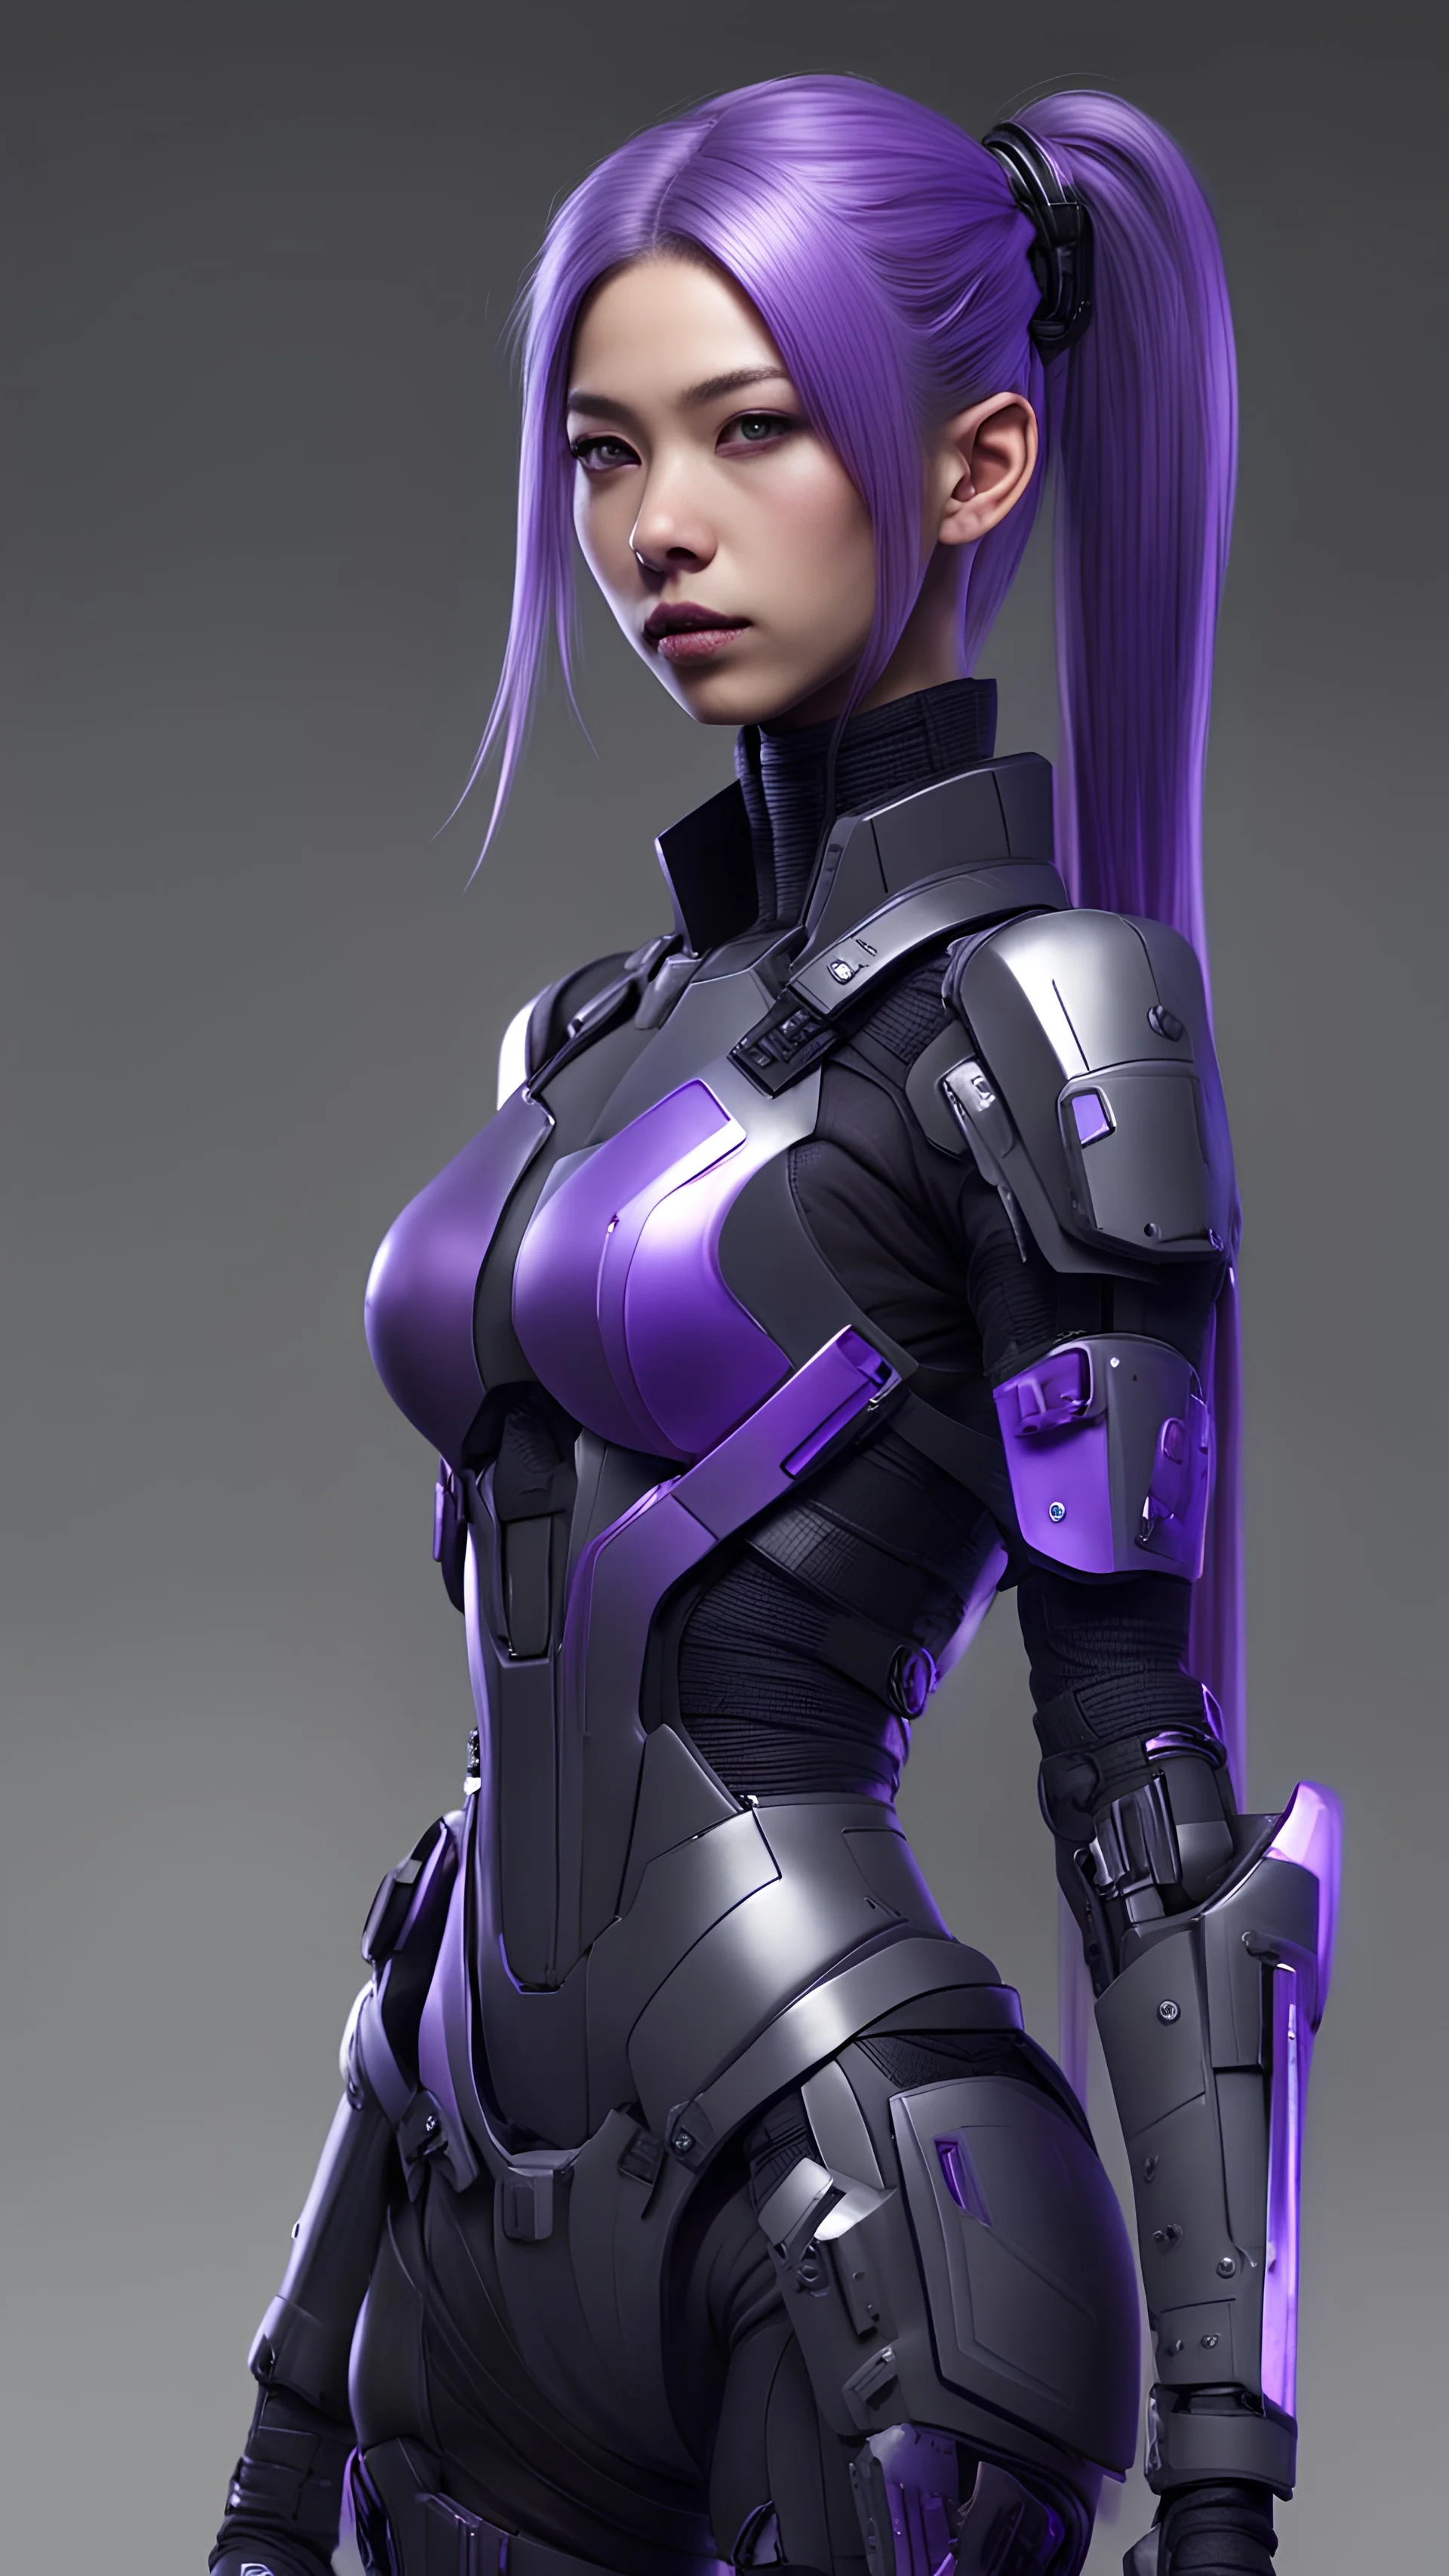 Young tan Scandinavian cyberpunk female with sharp features and extremely long, Tama Sakai like pigtails that start out as black at the scalp and transition into dark purple at the tips, with black, grey, white, and purple coloration futuristic body armor in a realistic style full body view